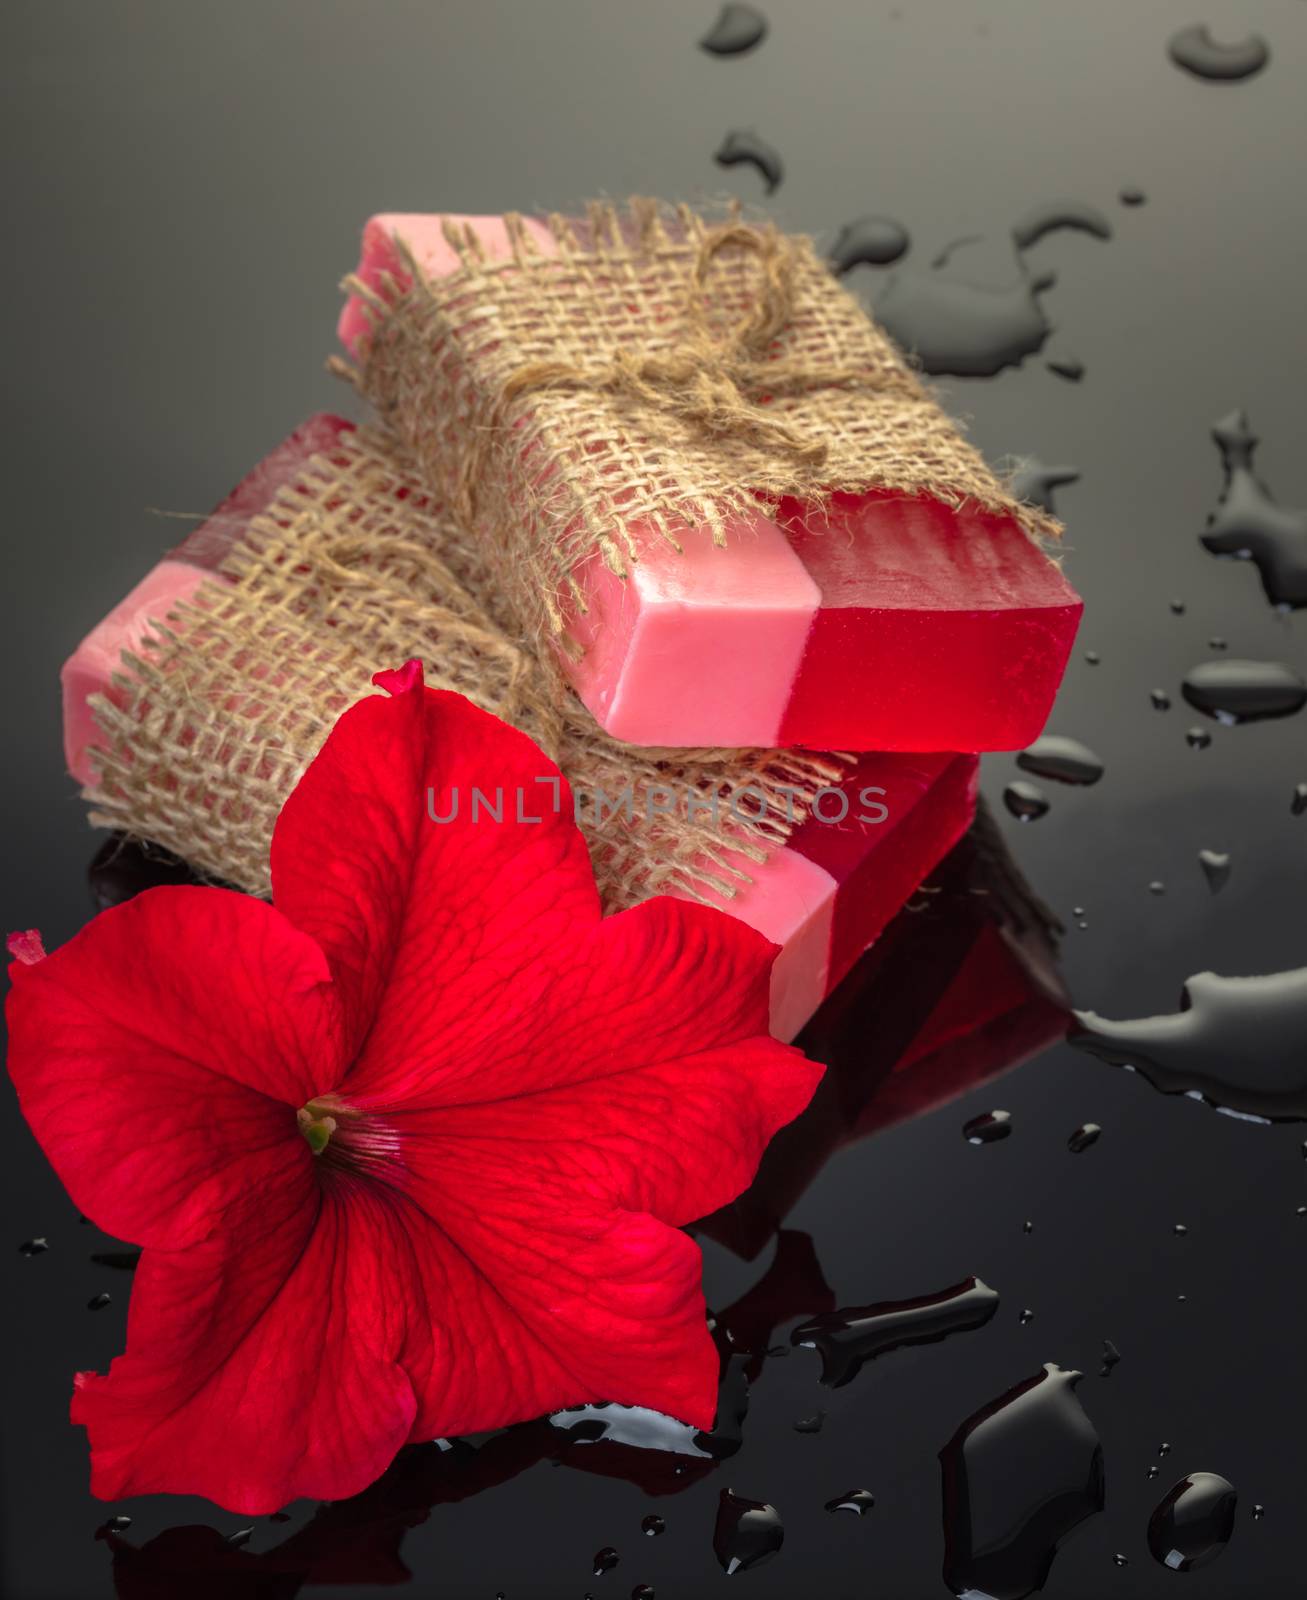 Handmade soap red with a flower on black background